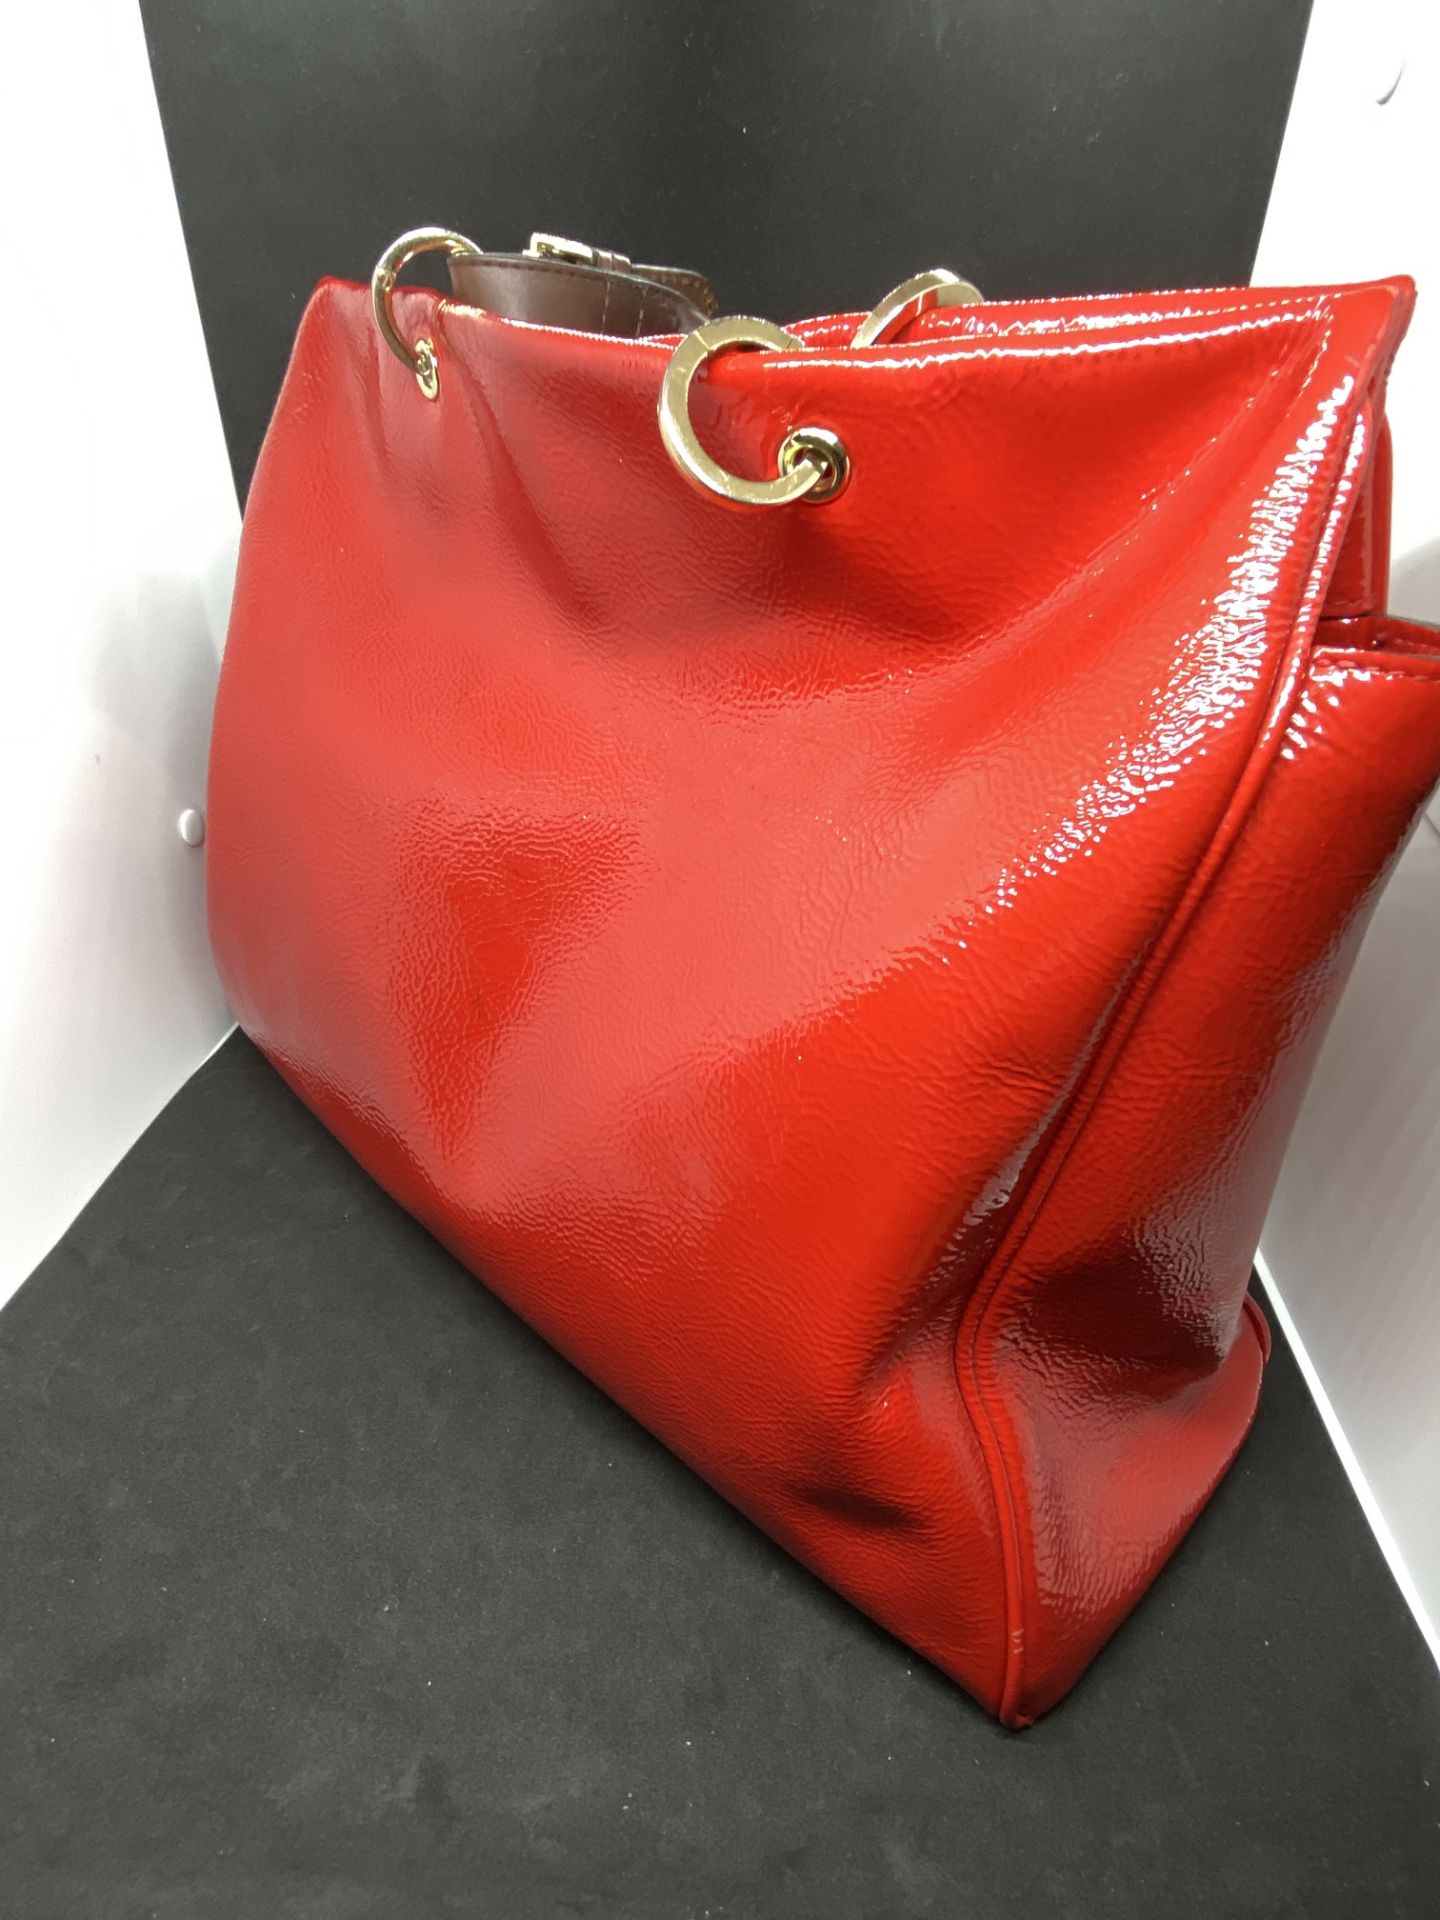 MULBERRY RED COLOURED HANDBAG - Image 2 of 17